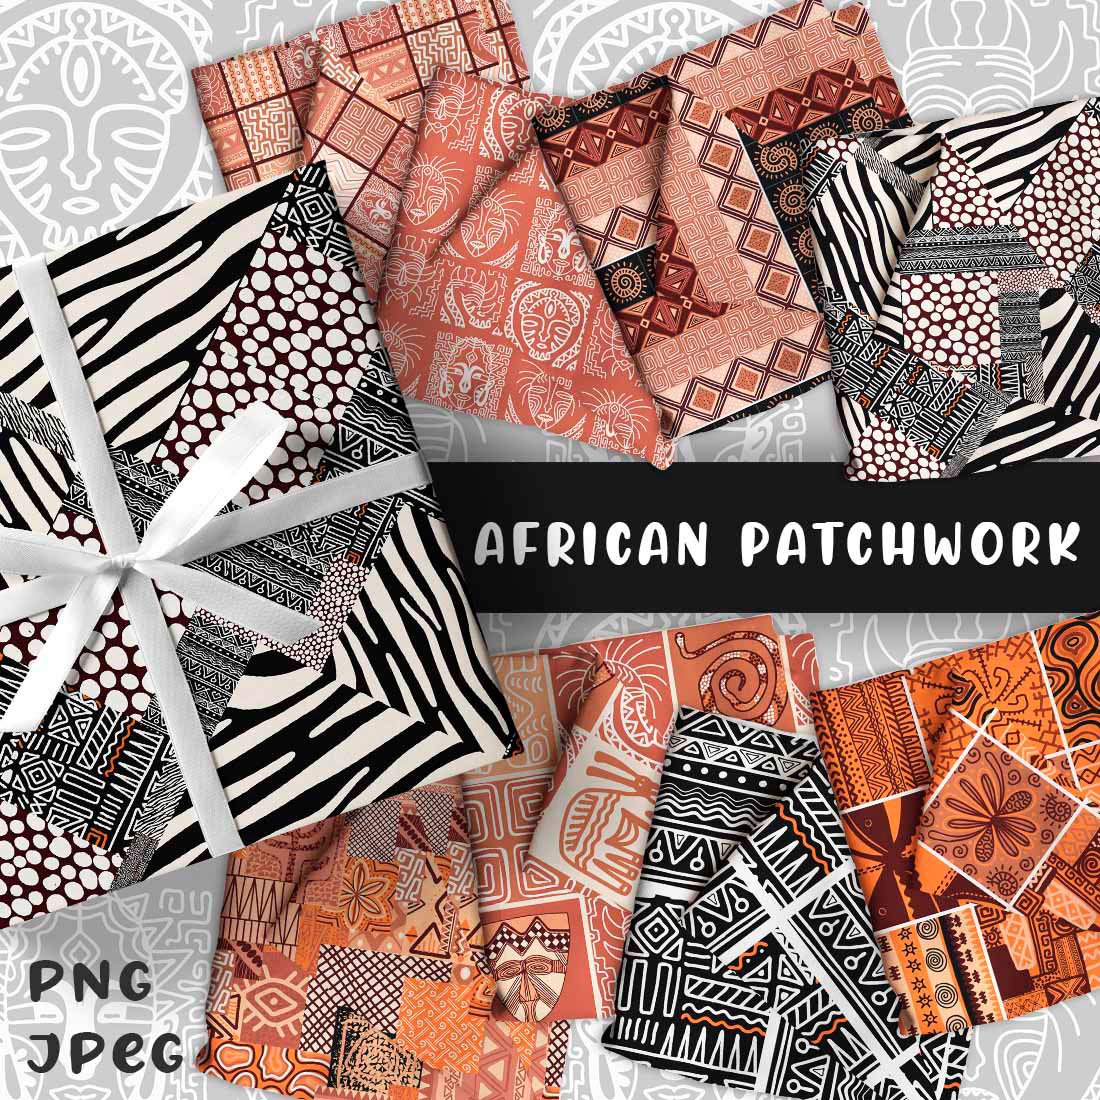 Pack of exquisite images of african patchwork patterns/